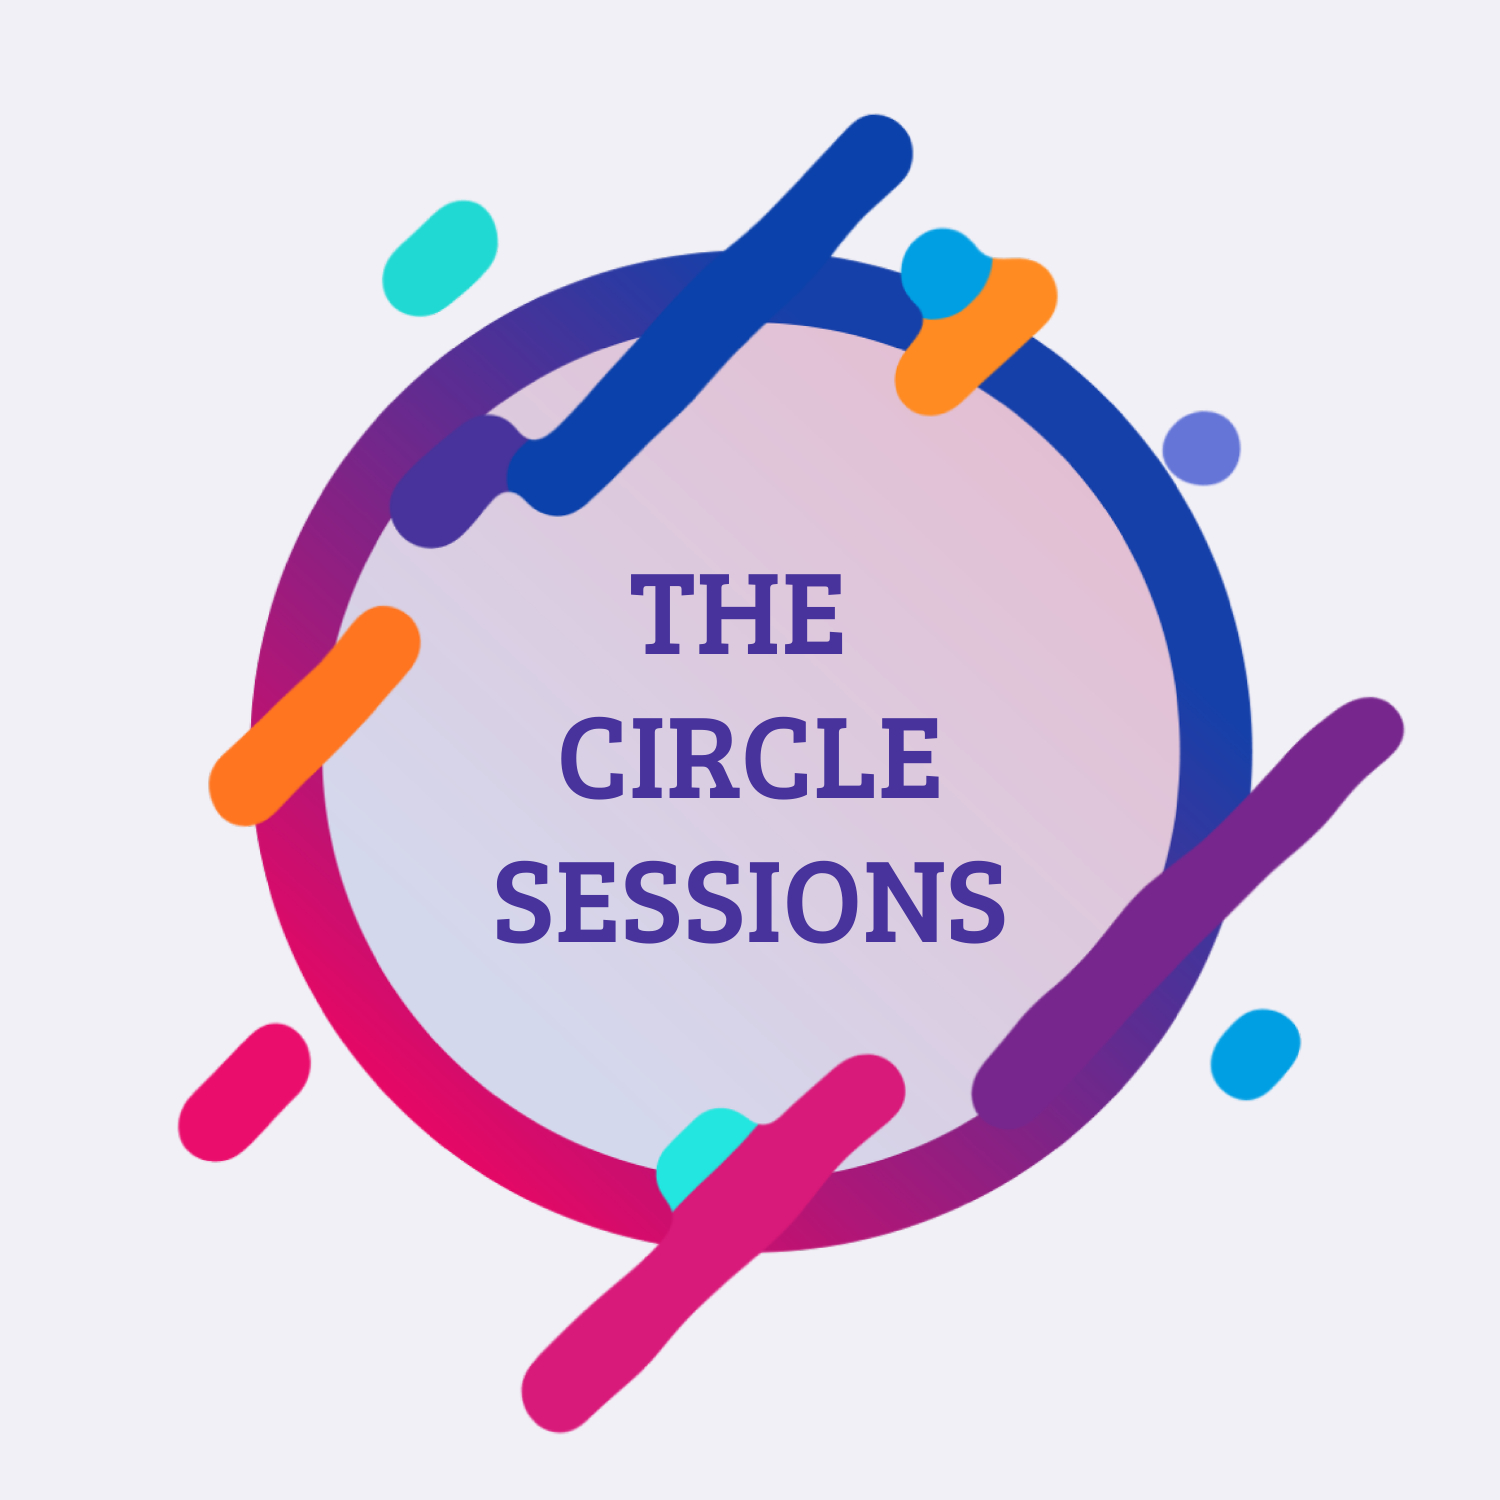 The Circle Sessions Podcast featuring The Circle of Experts